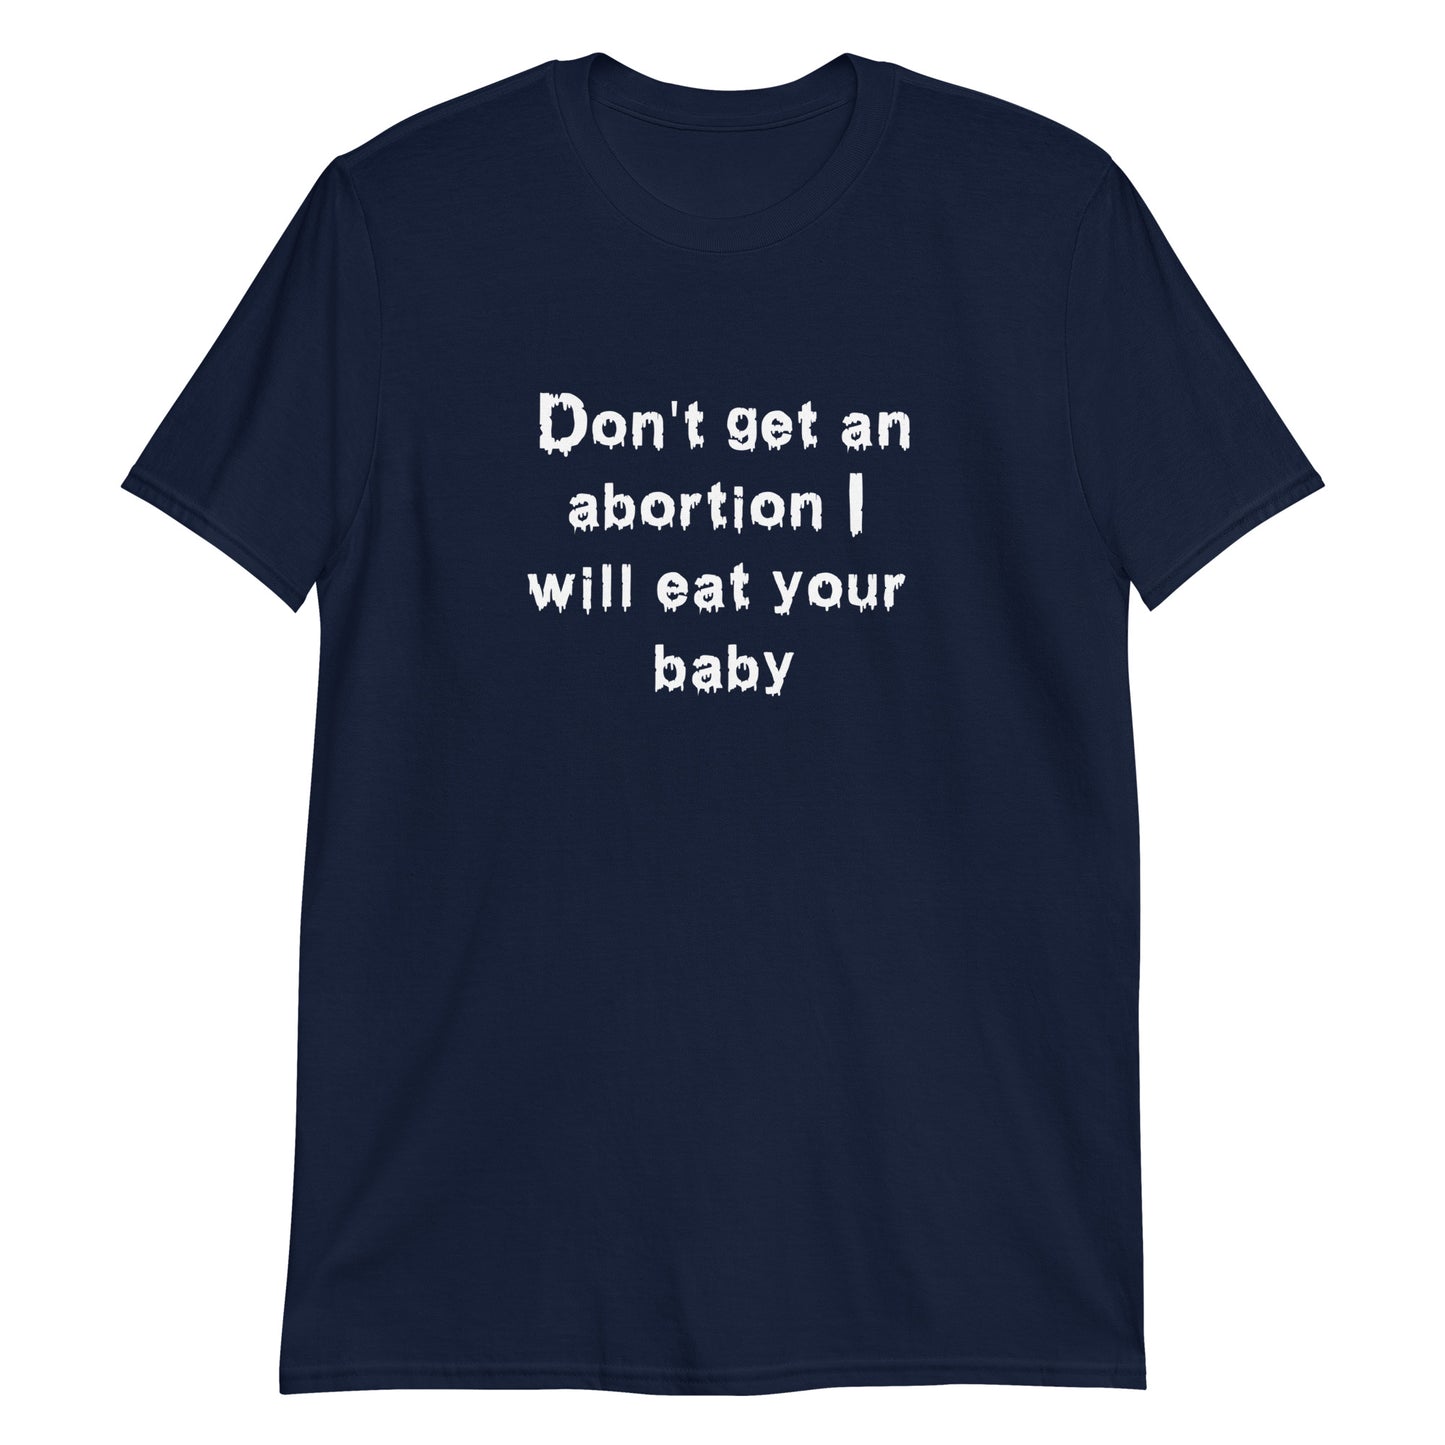 Don't Get An Abortion I Will Eat Your Baby.